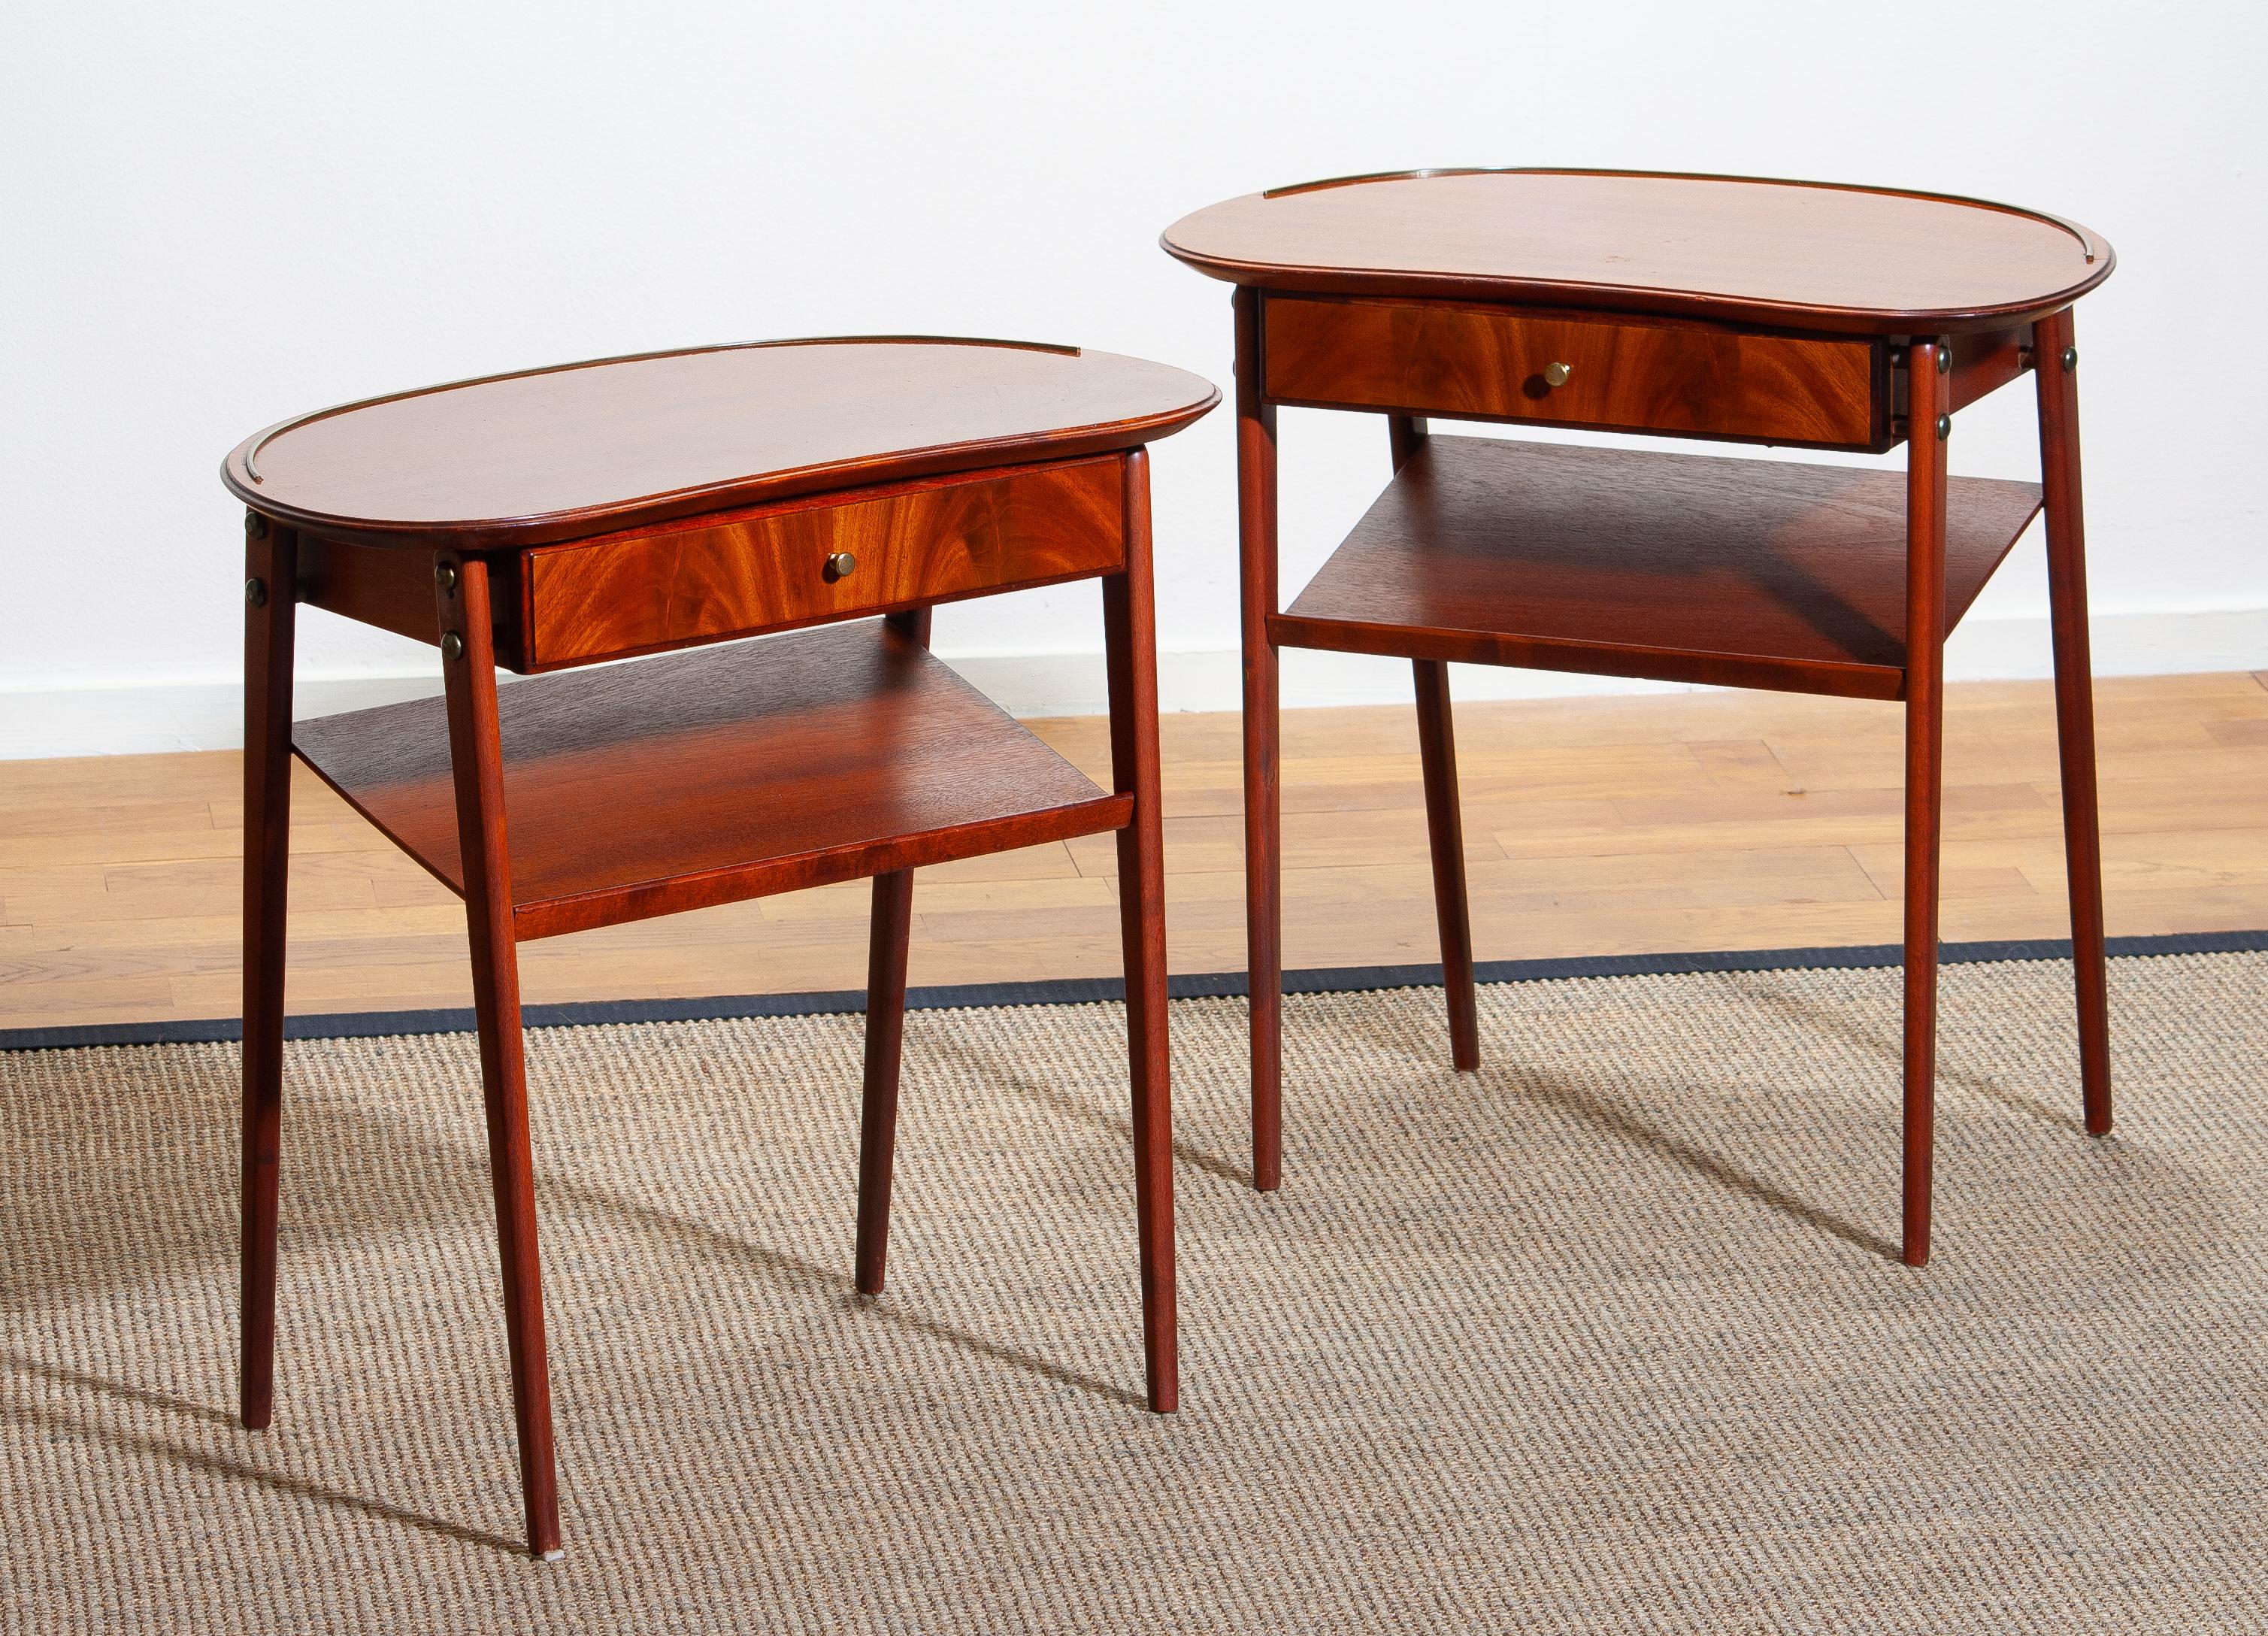 Beautiful and elegant set of two brass and mahogany nightstands made in Sweden. 1960s.
The set is in good condition.